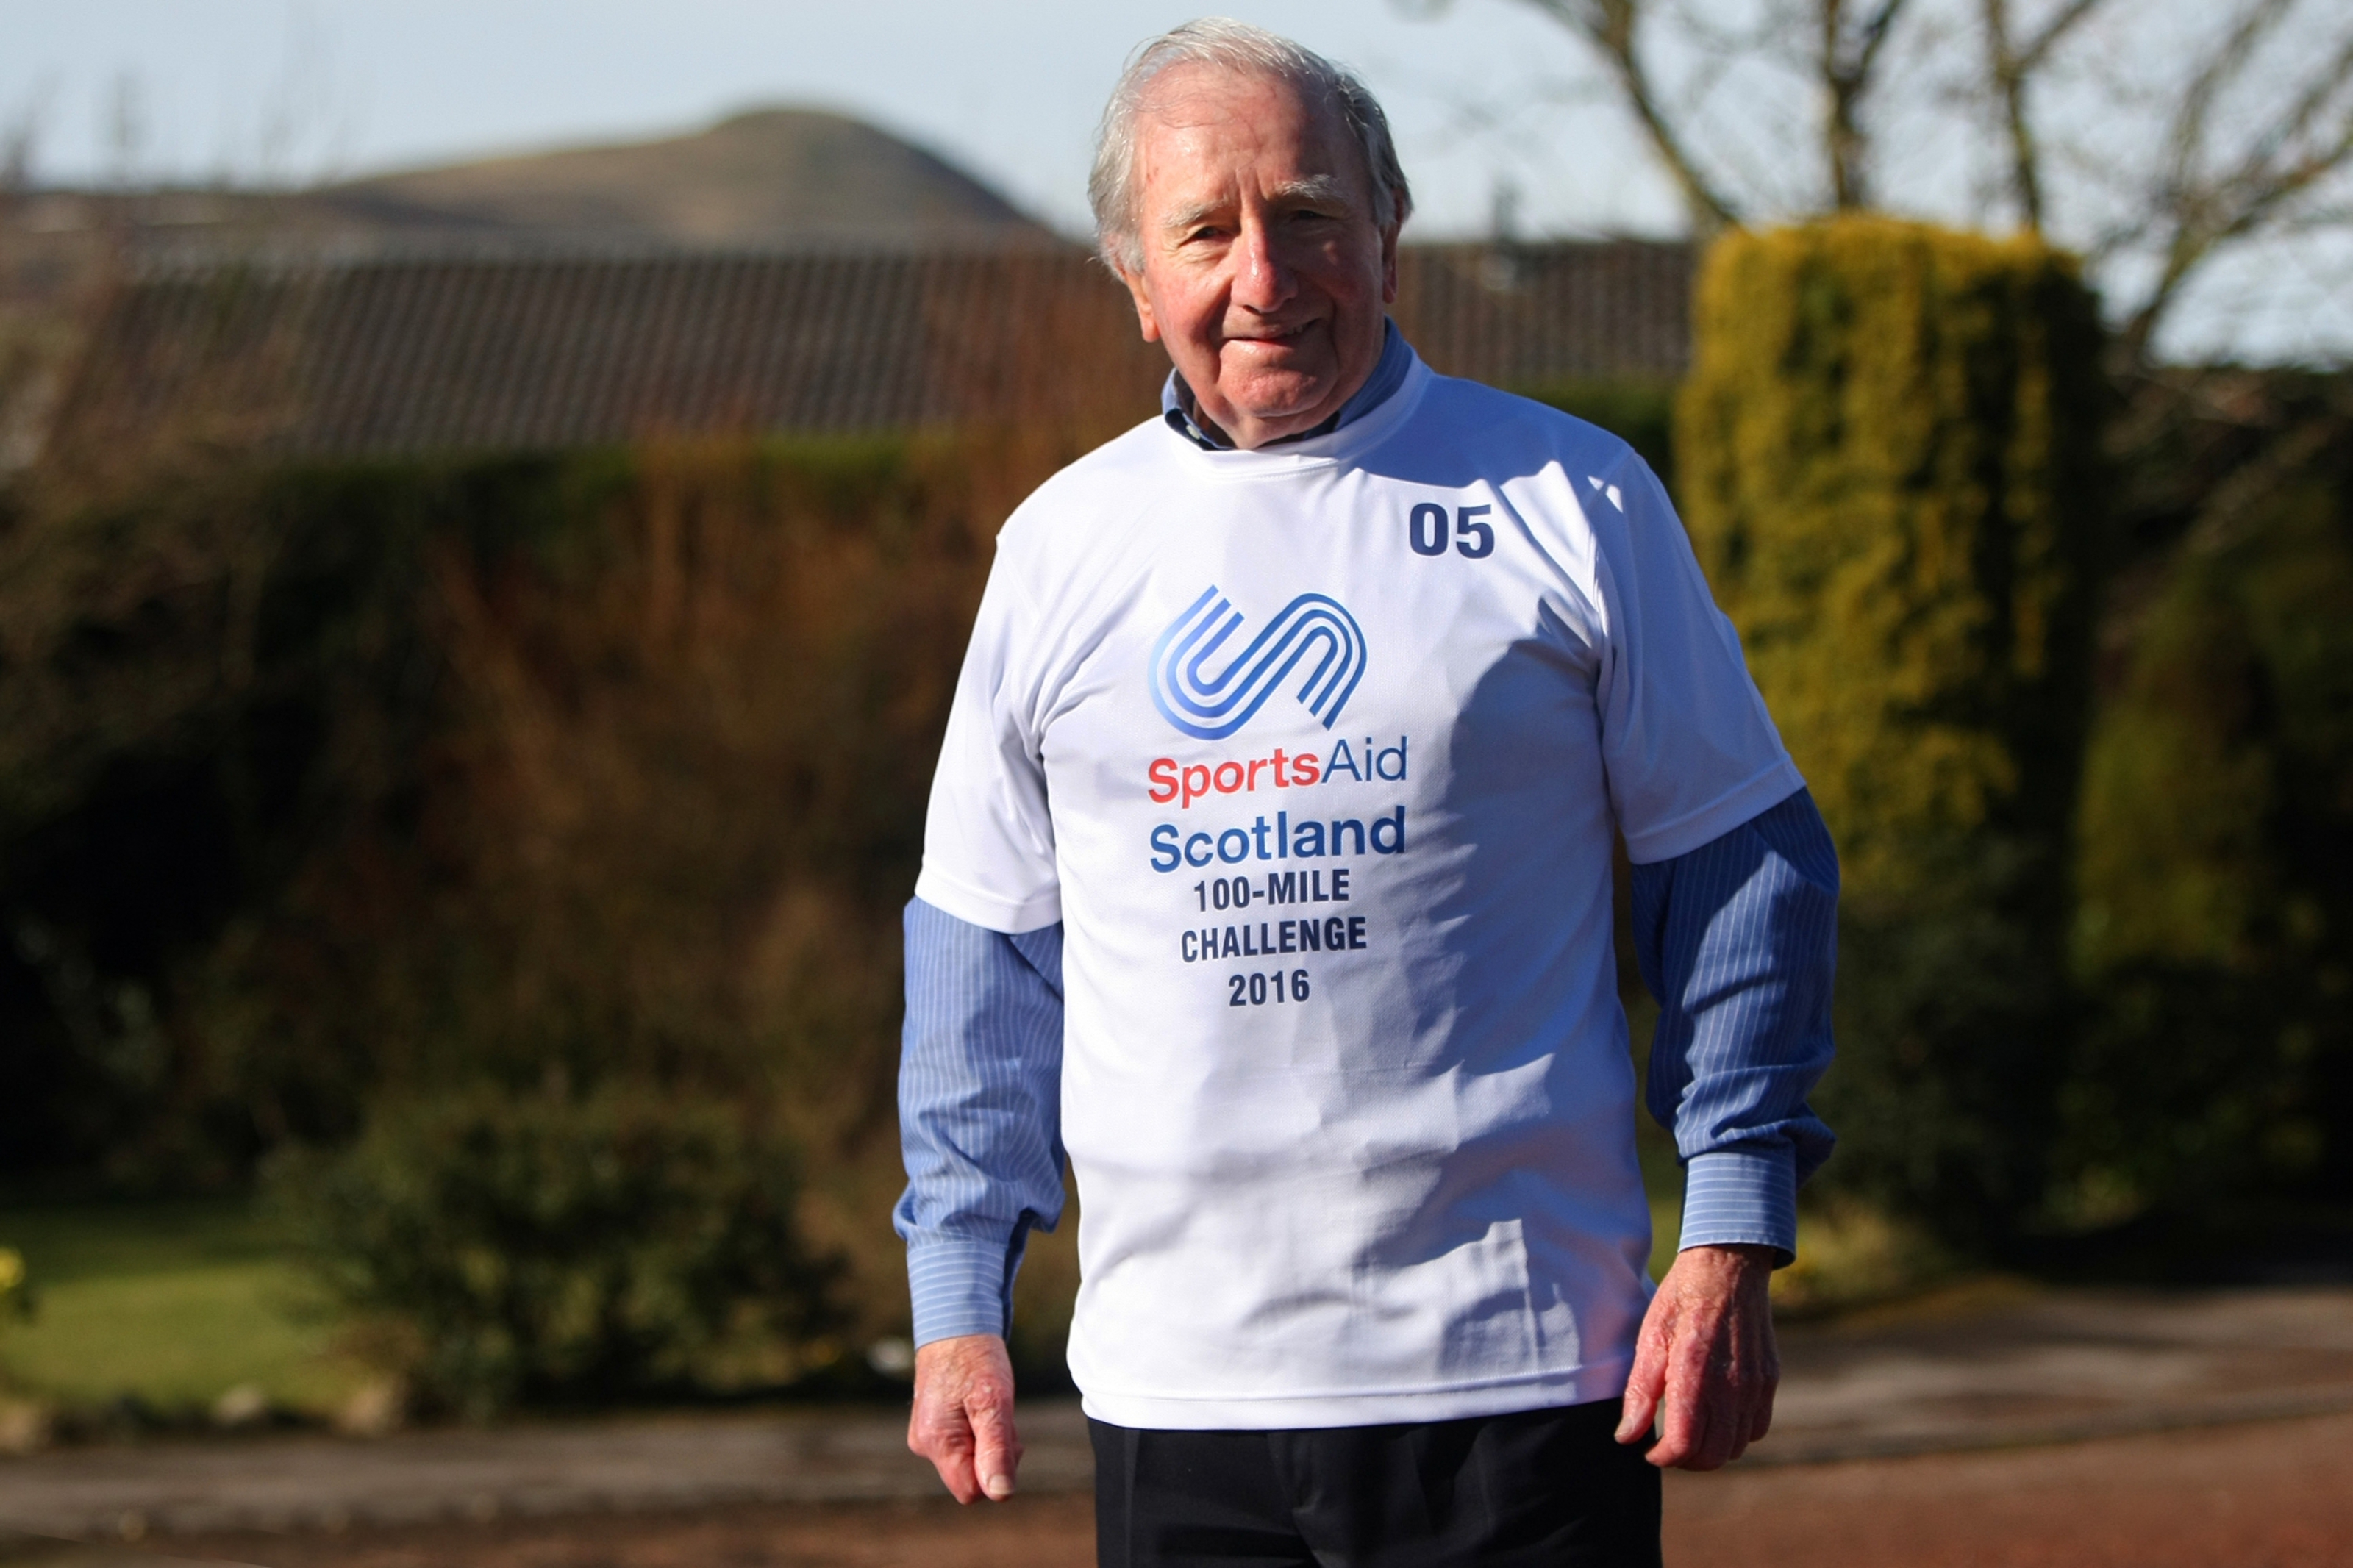 Kris Miller, Courier, 02/03/16. Picture today shows Rev Cameron  Mackenzie (86) who is walking 100 miles and swimming one mile over the next few weeks to raise money for Sport Aid Scotland.  He raised £10,000 for Alzheimers research a few years ago by doing the same thing and is relishing the challenge to do it all over again.